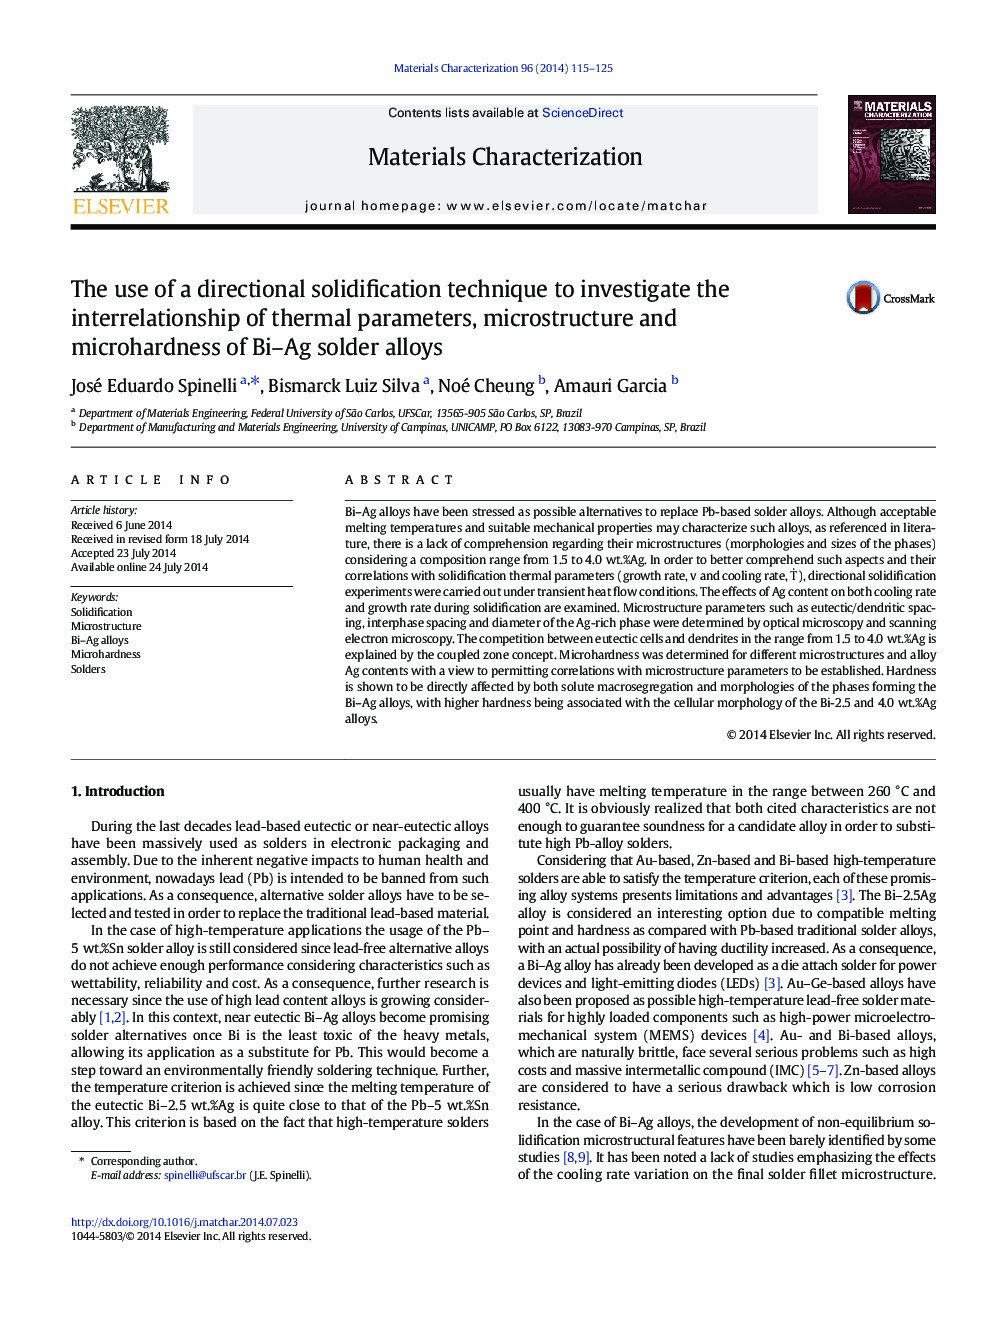 The use of a directional solidification technique to investigate the interrelationship of thermal parameters, microstructure and microhardness of Bi–Ag solder alloys